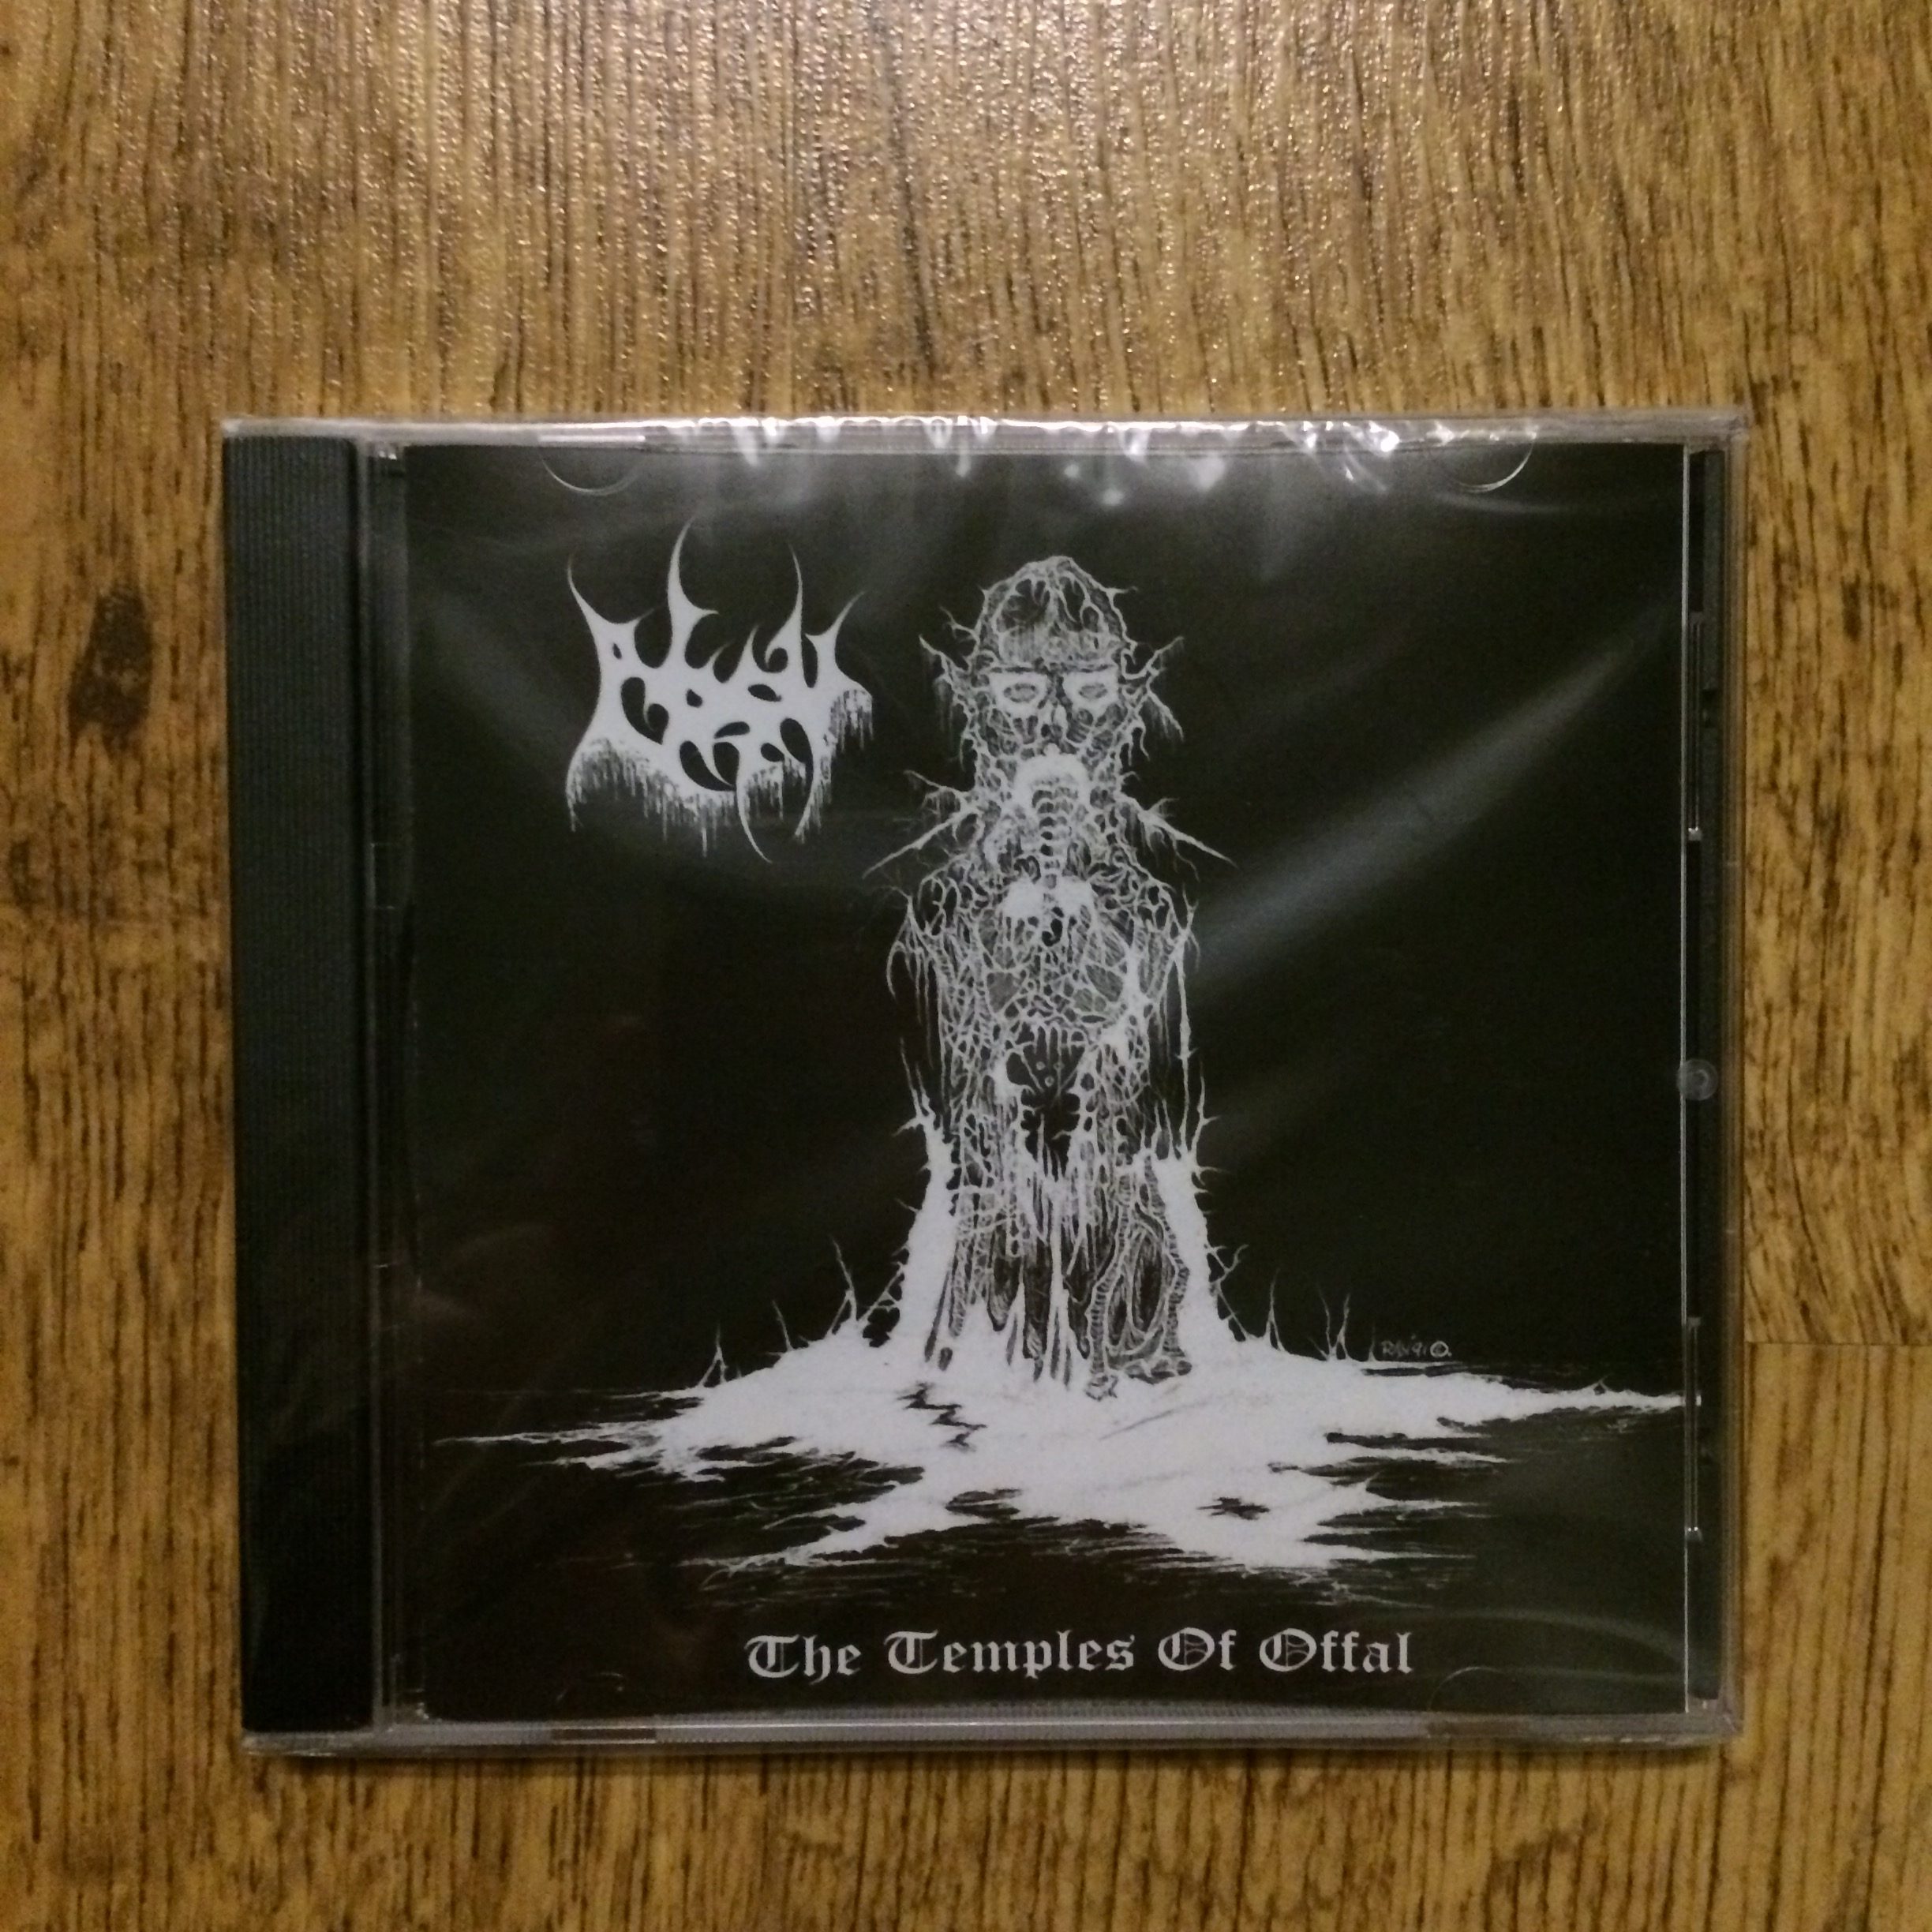 Photo of the Absu - "The Temples of Offal / Return of the Ancients" CD